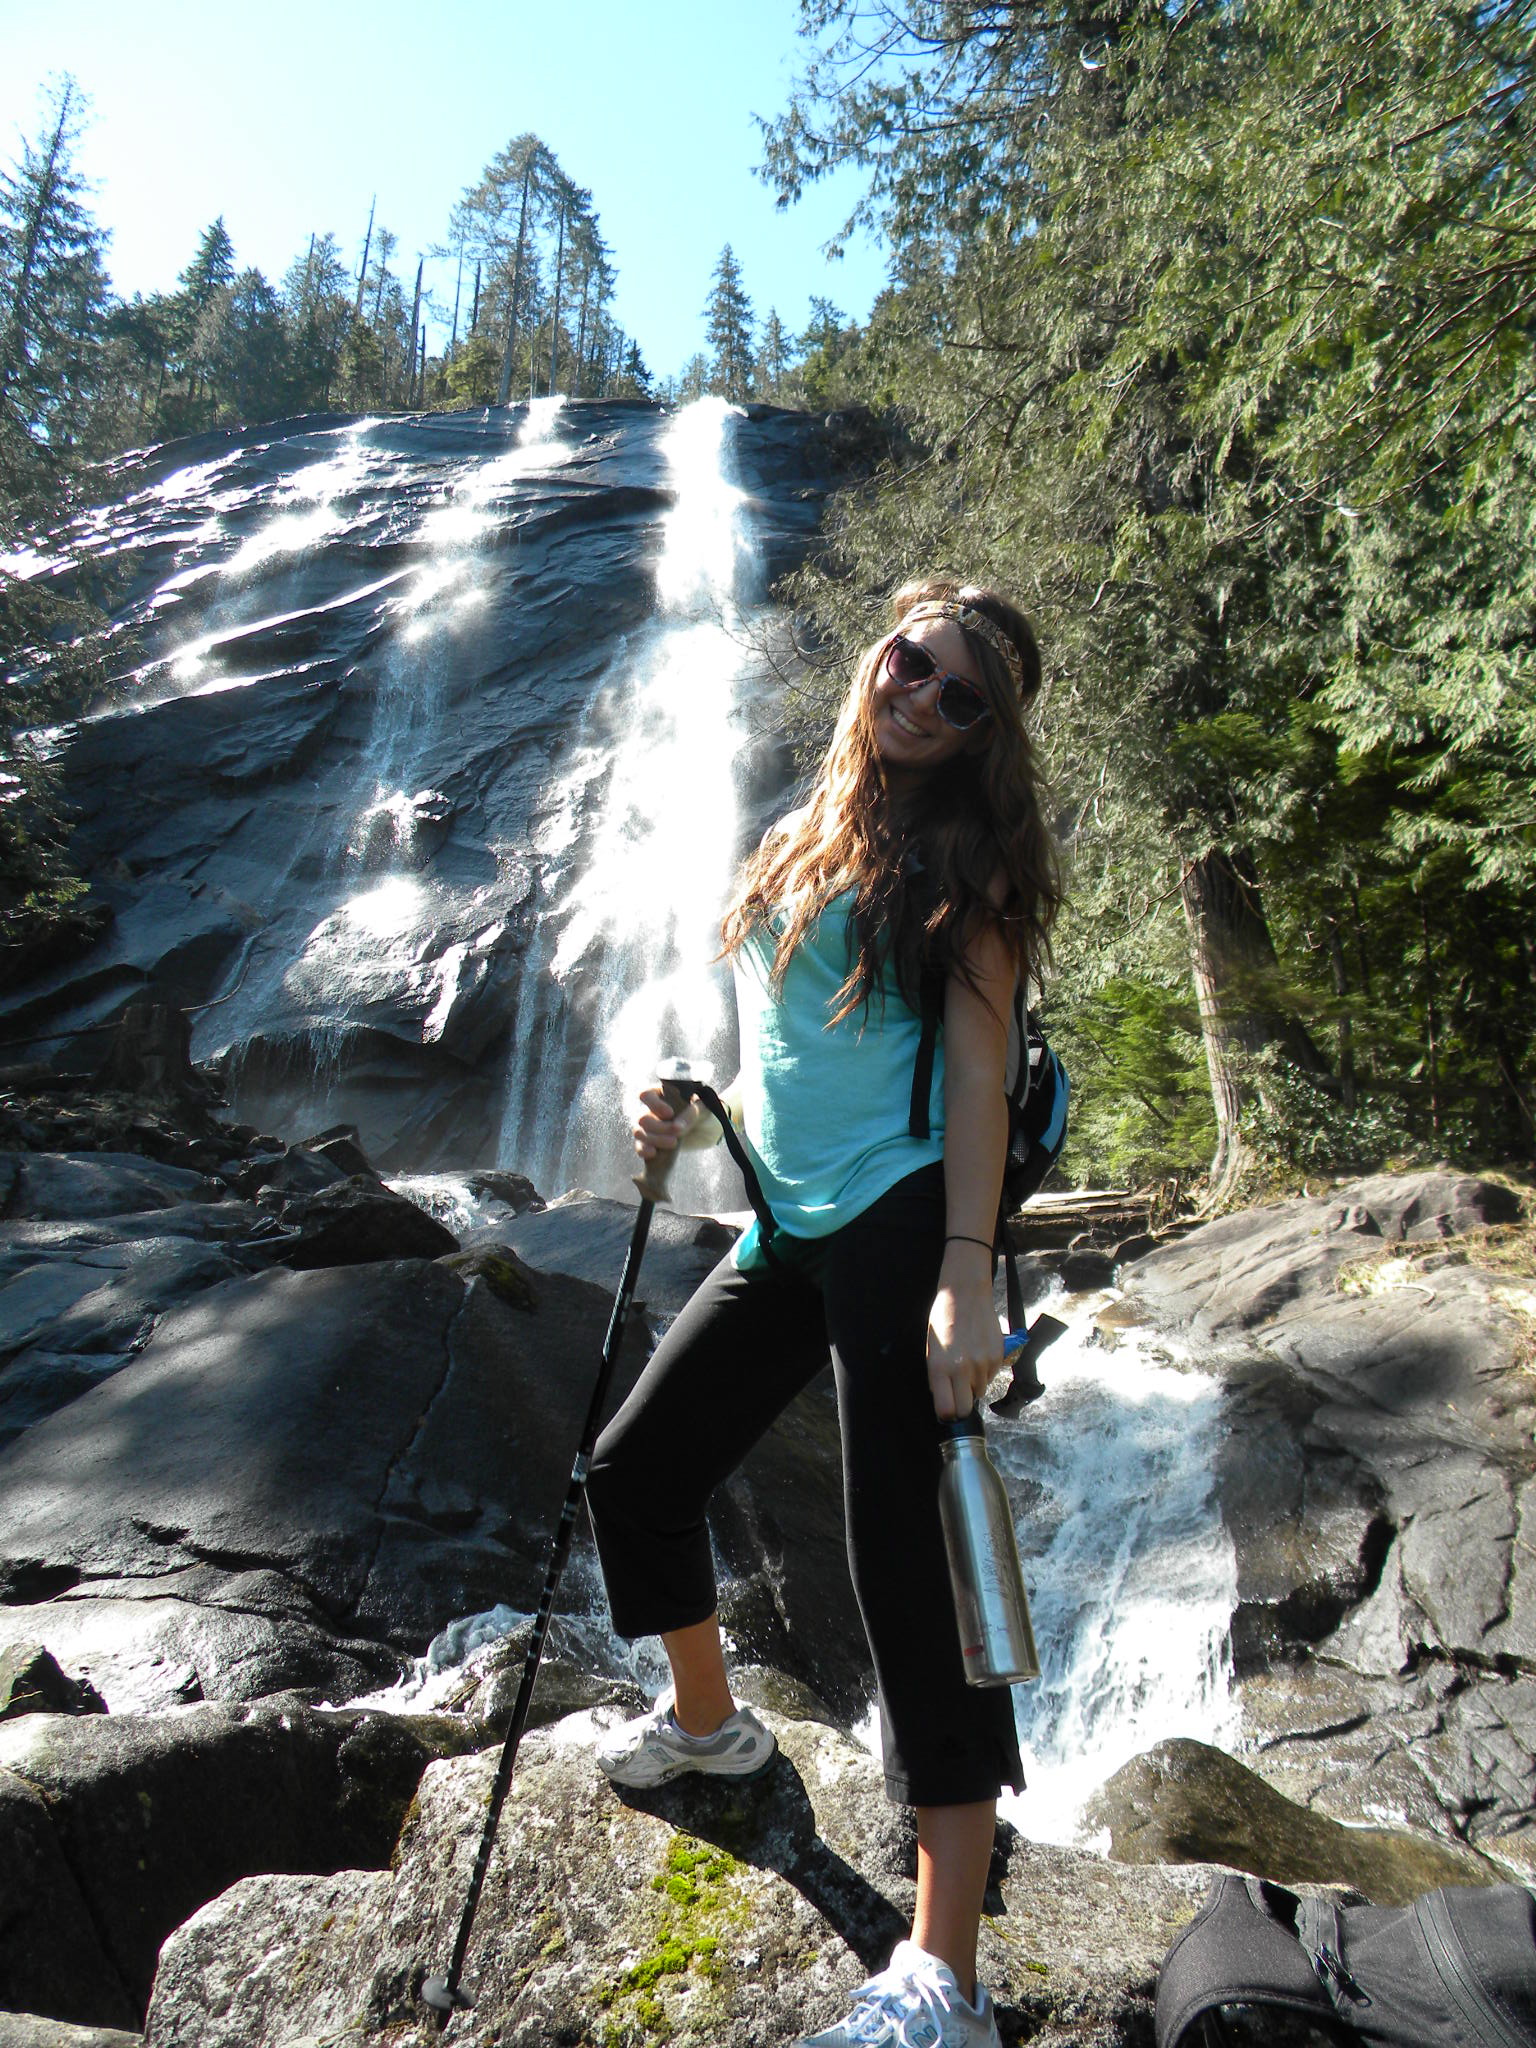 Reviewing The Past Bridal Veil Falls Wa Not Your Average Adventures